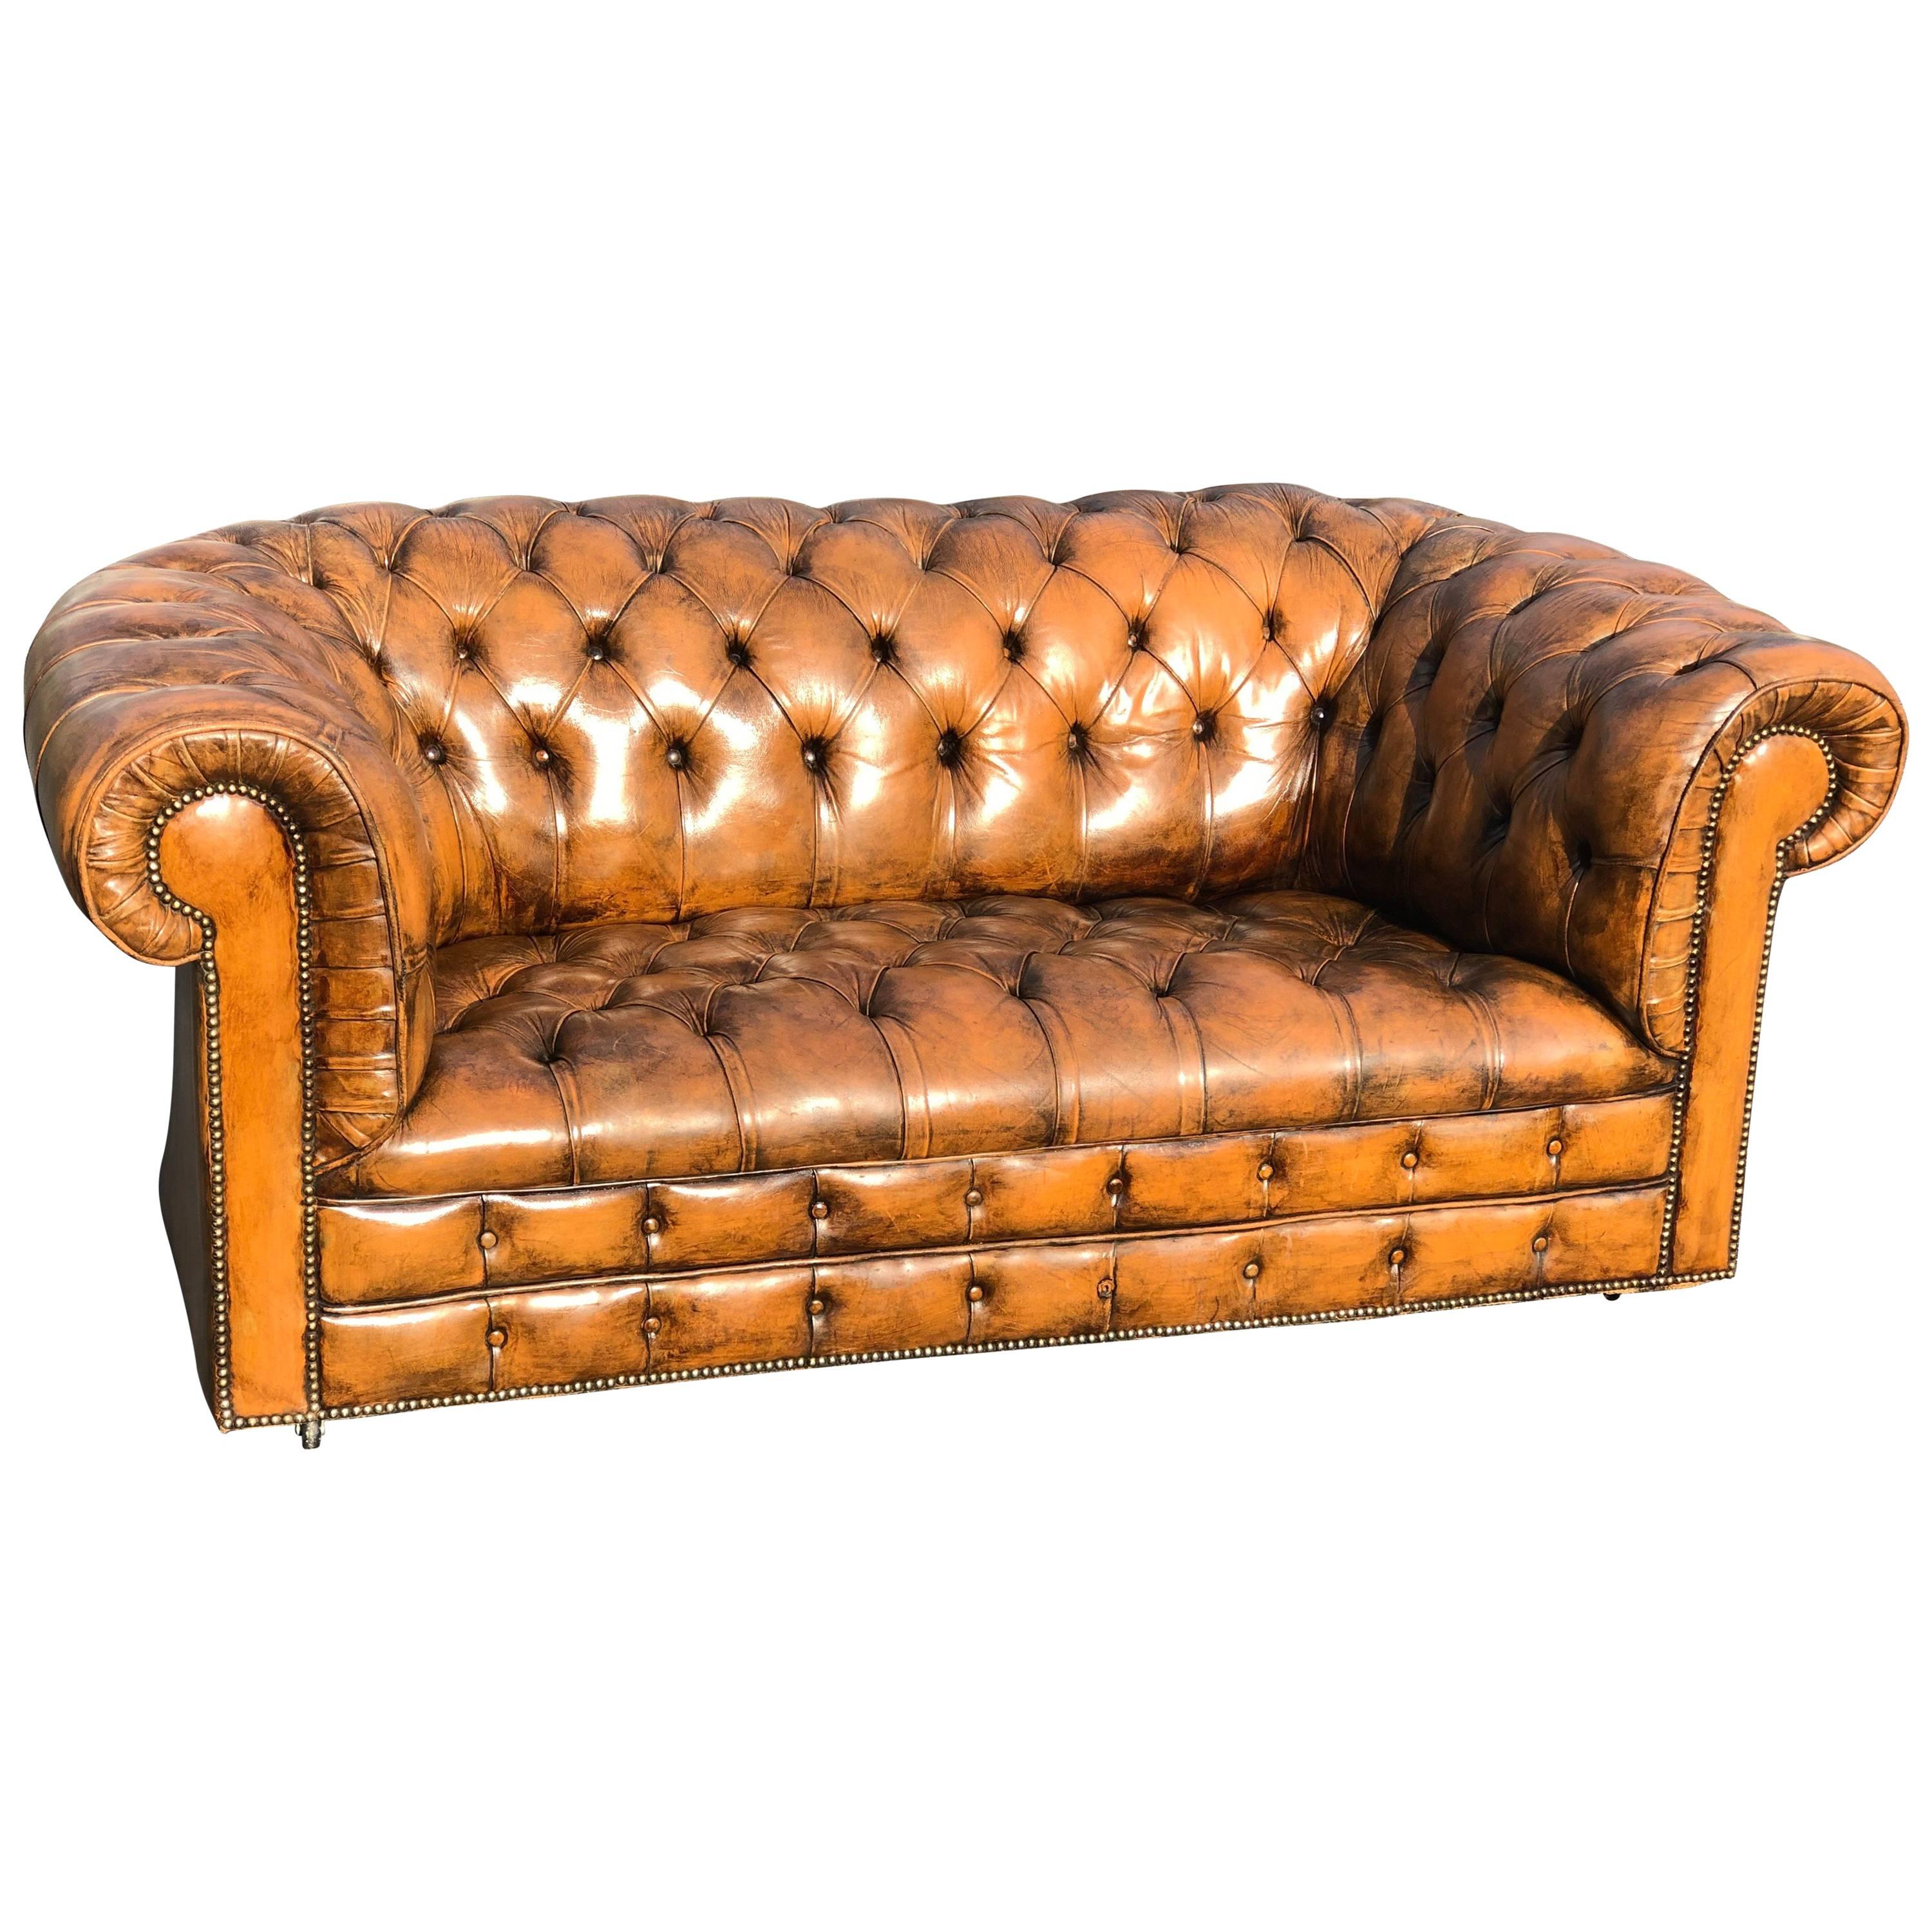 Antique Classic Leather Chesterfield Love Seat